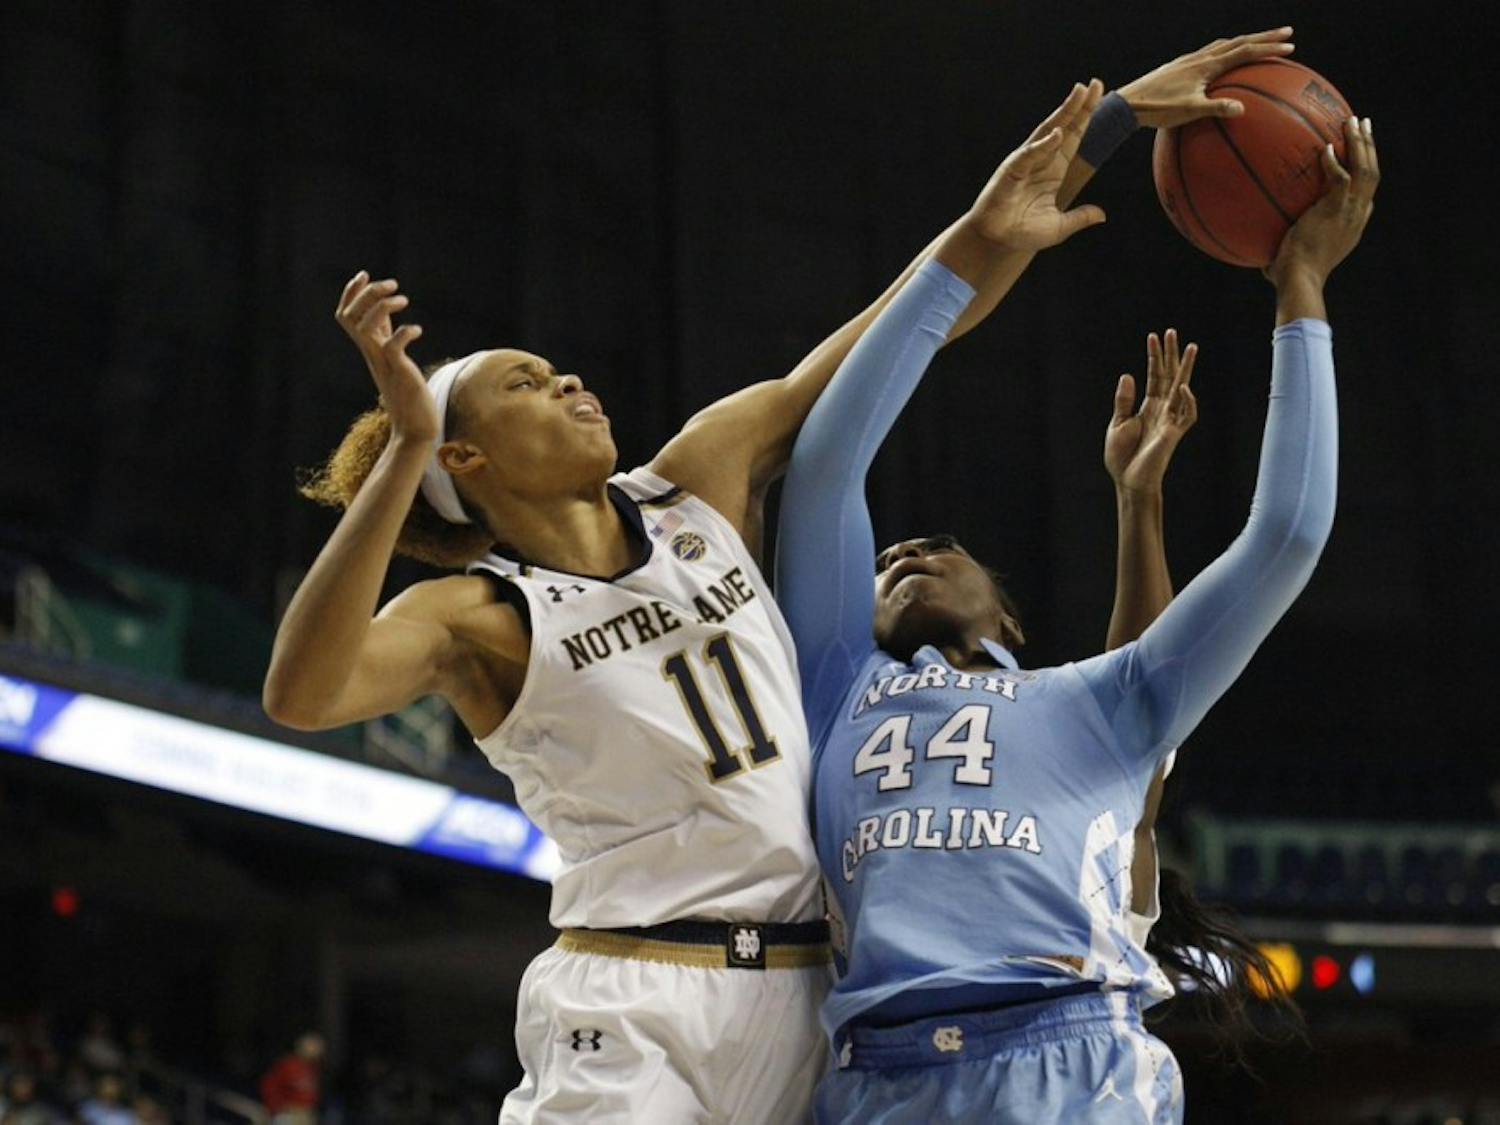 North Carolina sophomore forward Janelle Bailey goes up for a shot against Notre Dame forward Briana Turner in an ACC Tournament second-round matchup on March 8, 2019.